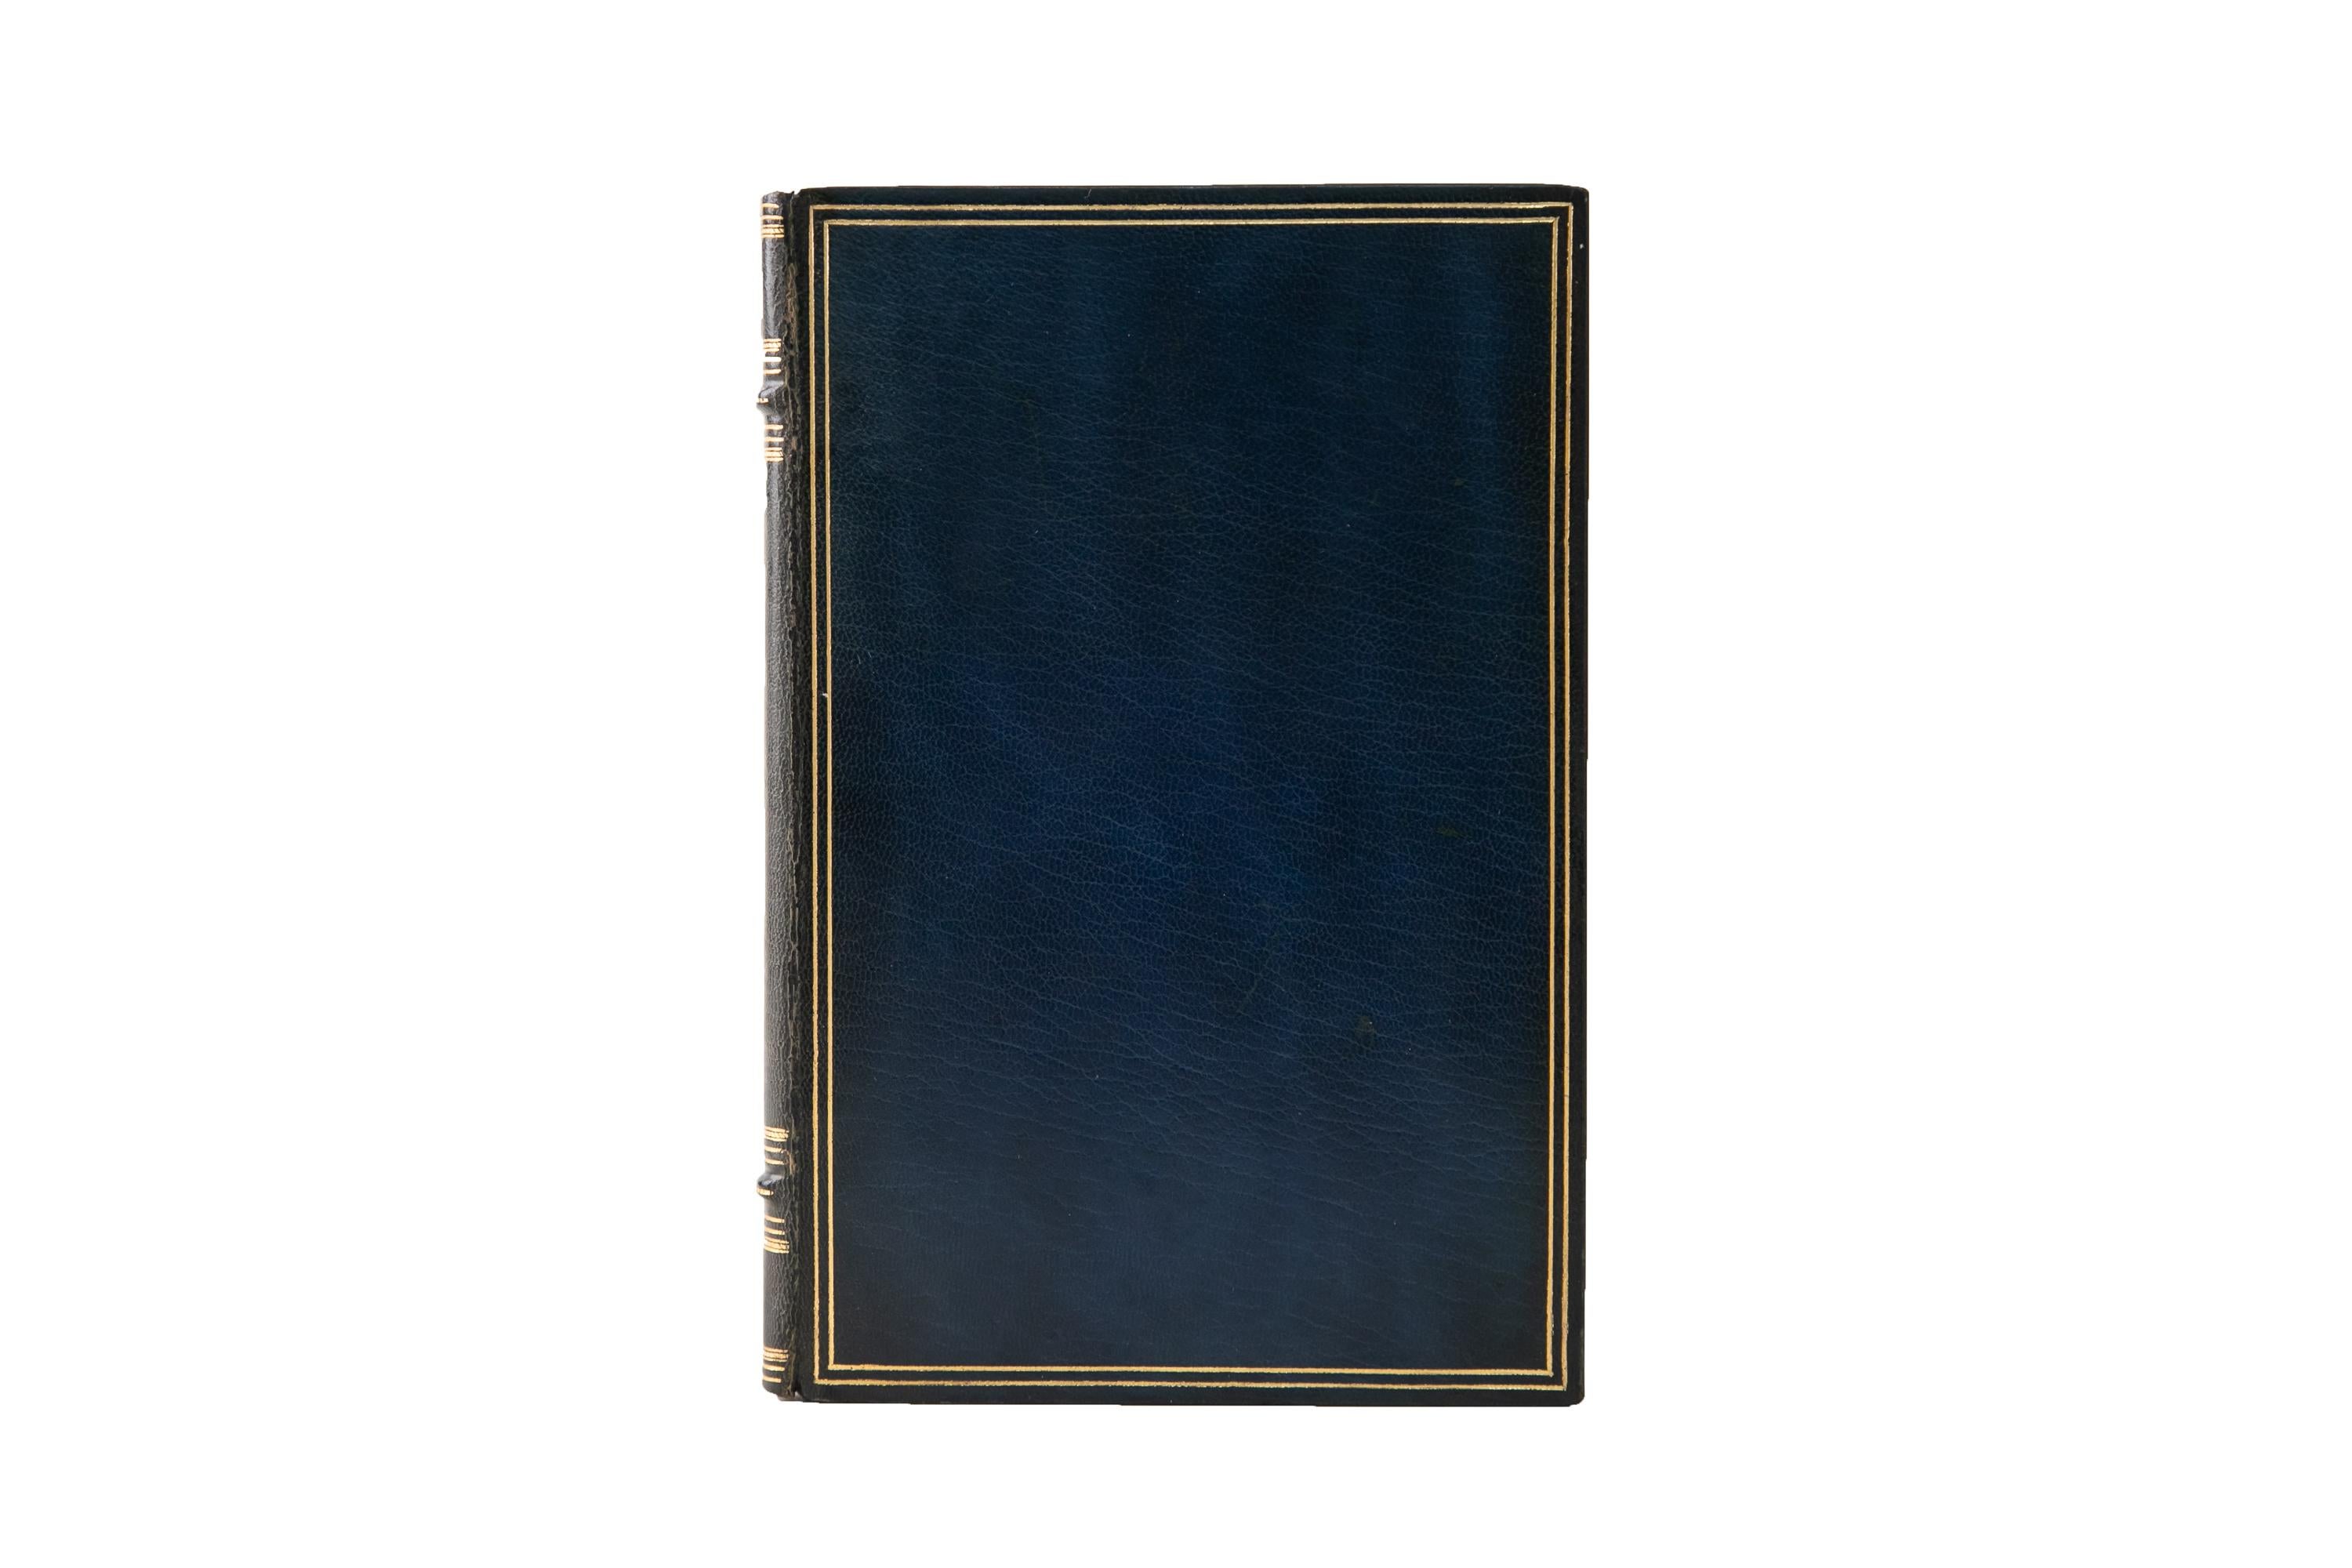 1 Volume. Kahlil Gibran, The Prophet. Bound in full blue morocco with the covers displaying a double-ruled gilt-tooled border. The spines display raised bands, bordering, floral panel detailing, and label lettering, all gilt-tooled. The top edge is